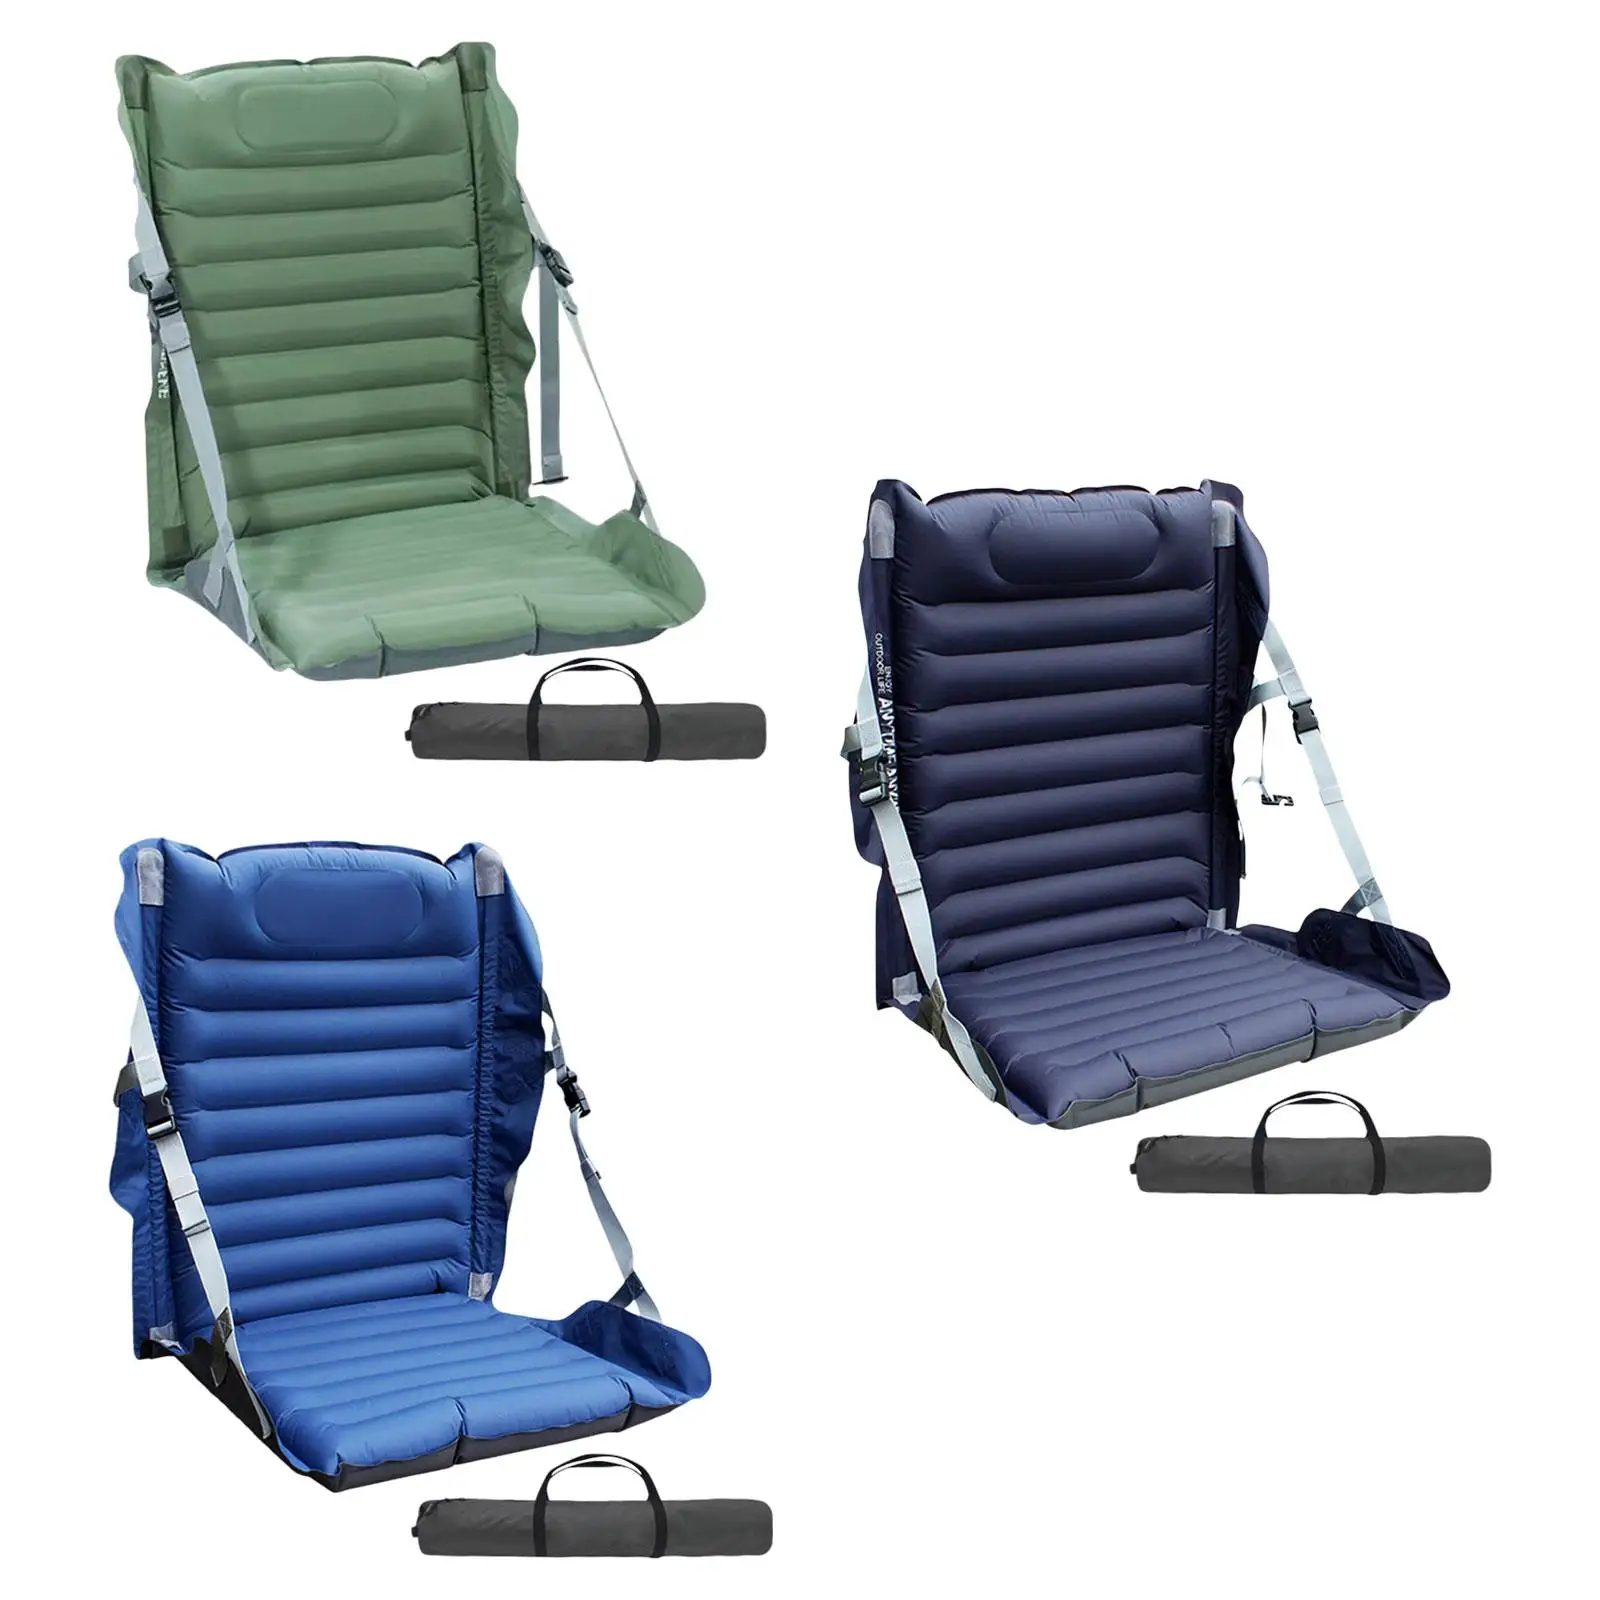 Floor Chair with Back Support Inflatable Waterproof for Fishing Beach Picnic